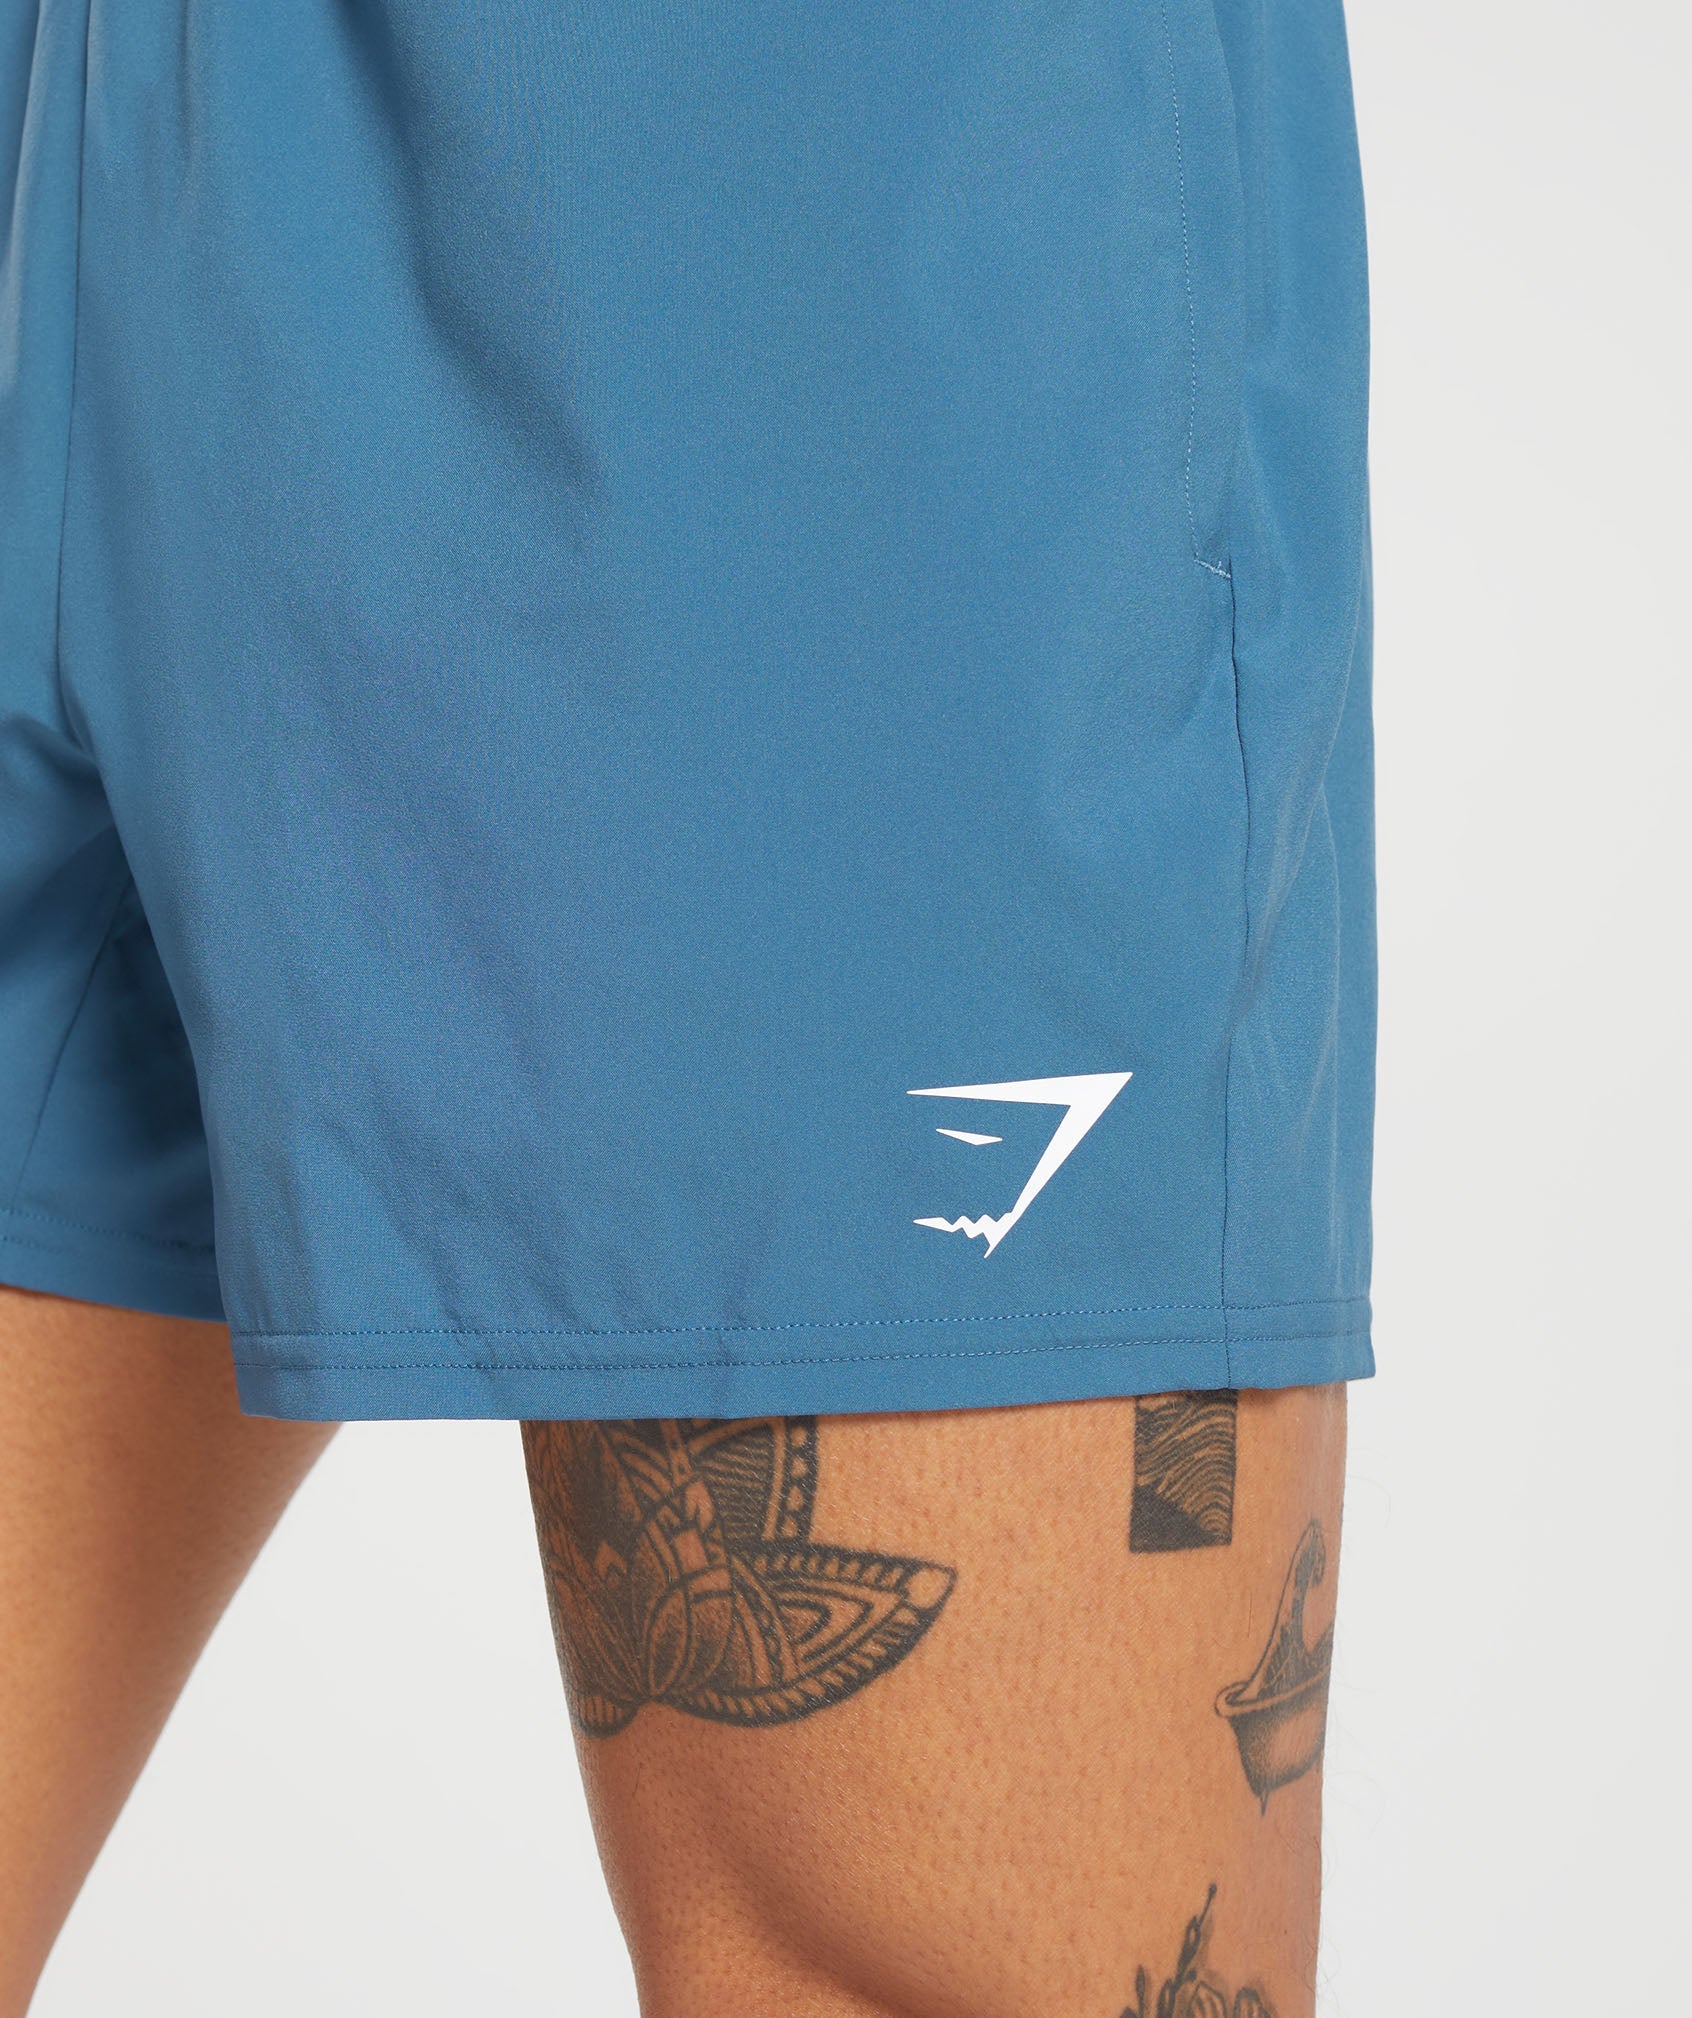 Arrival 5" Shorts in Utility Blue - view 5